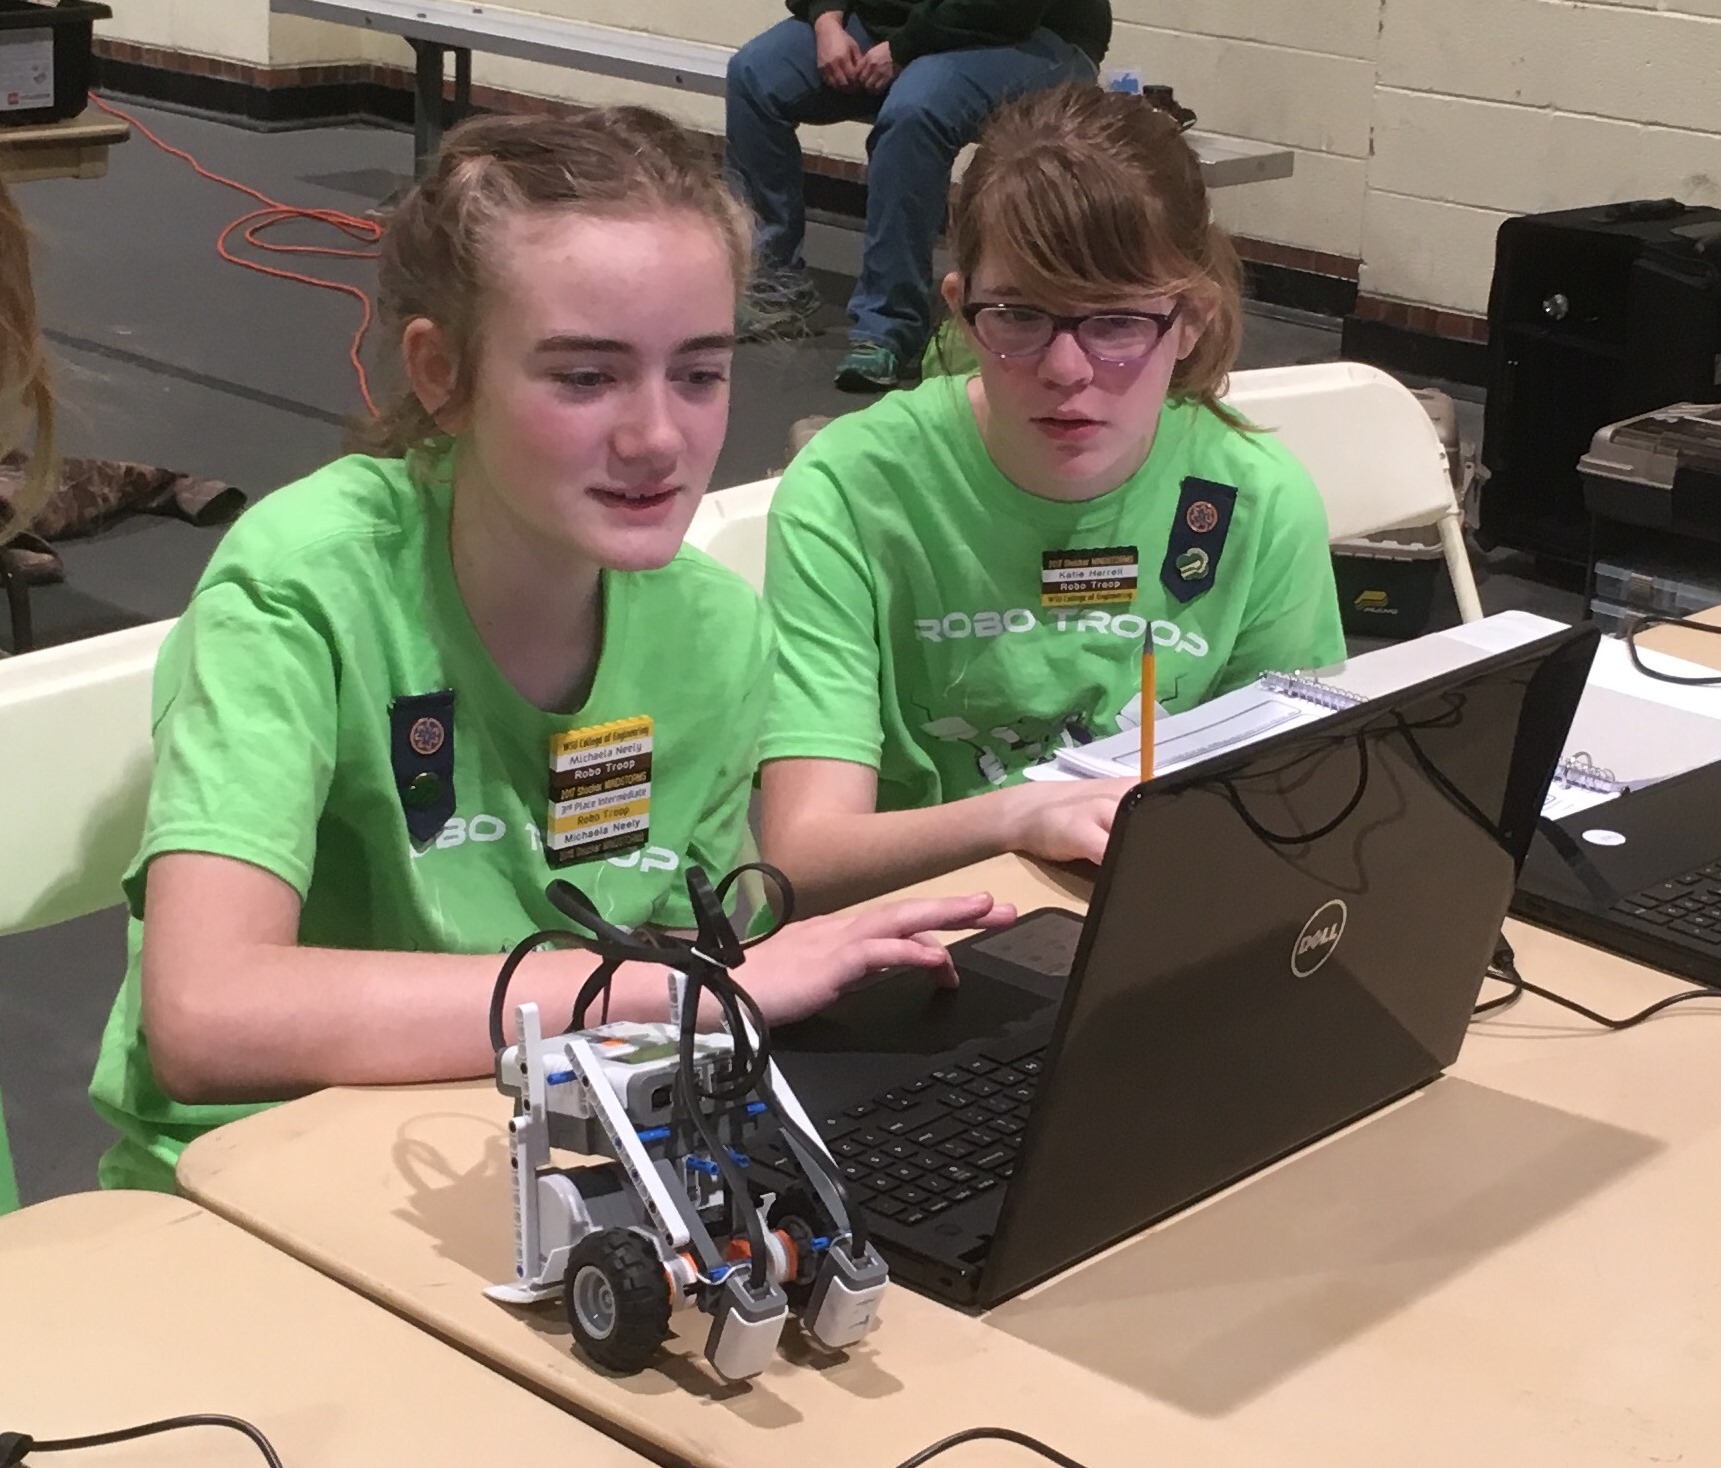 Members of the Girls Scouts of the Kansas Heartland's Robo Troop MINDSTORMS team modify the program on their LEGO robot between competition runs during the 2017 challenge.